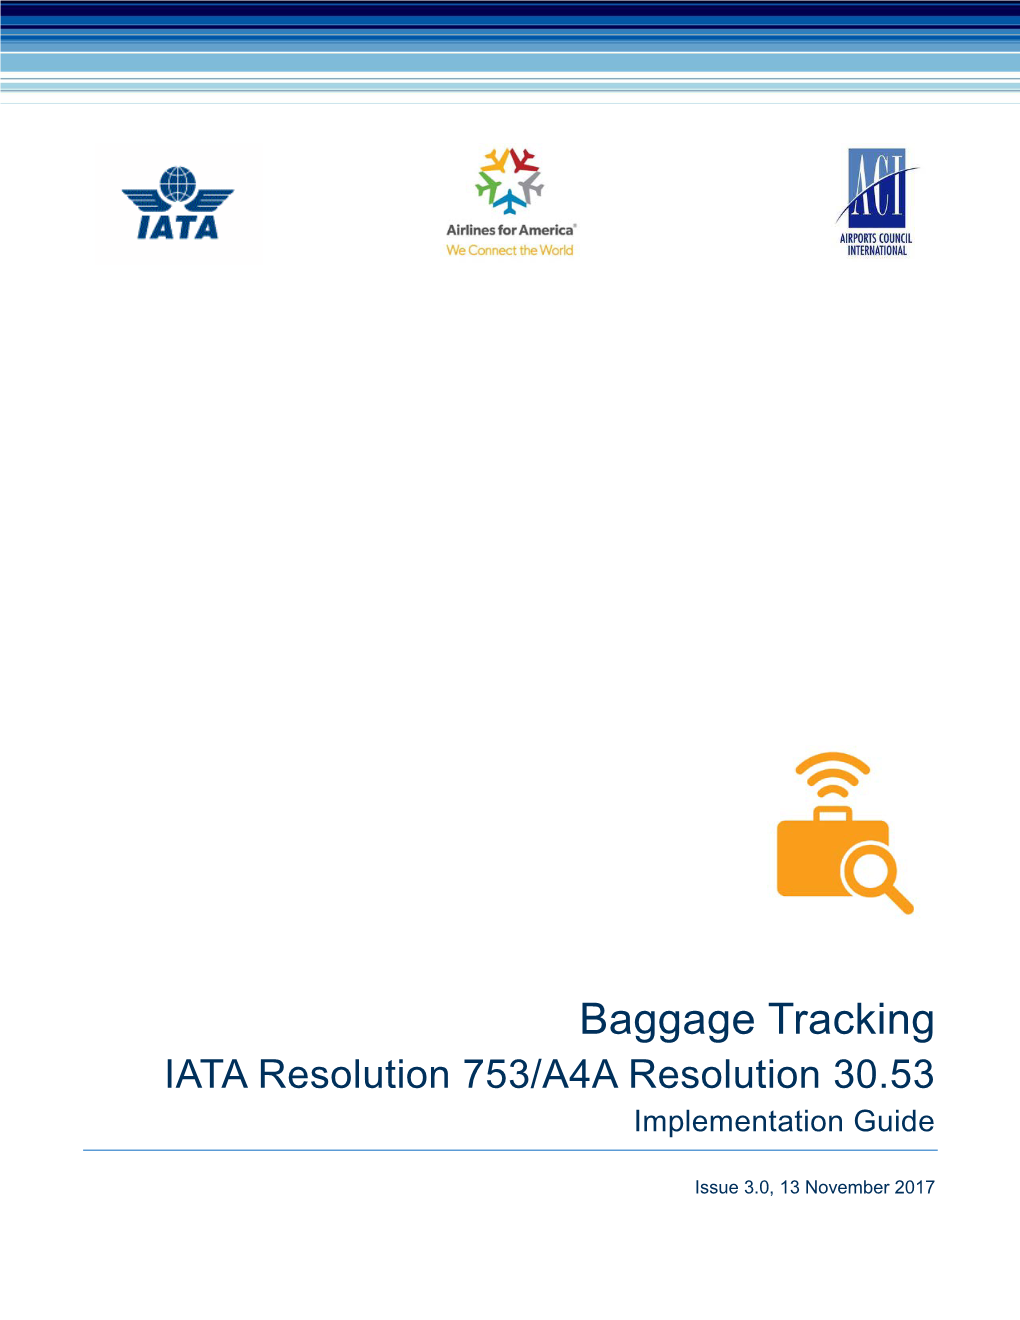 Baggage Tracking IATA Resolution 753/A4A Resolution 30.53 Implementation Guide